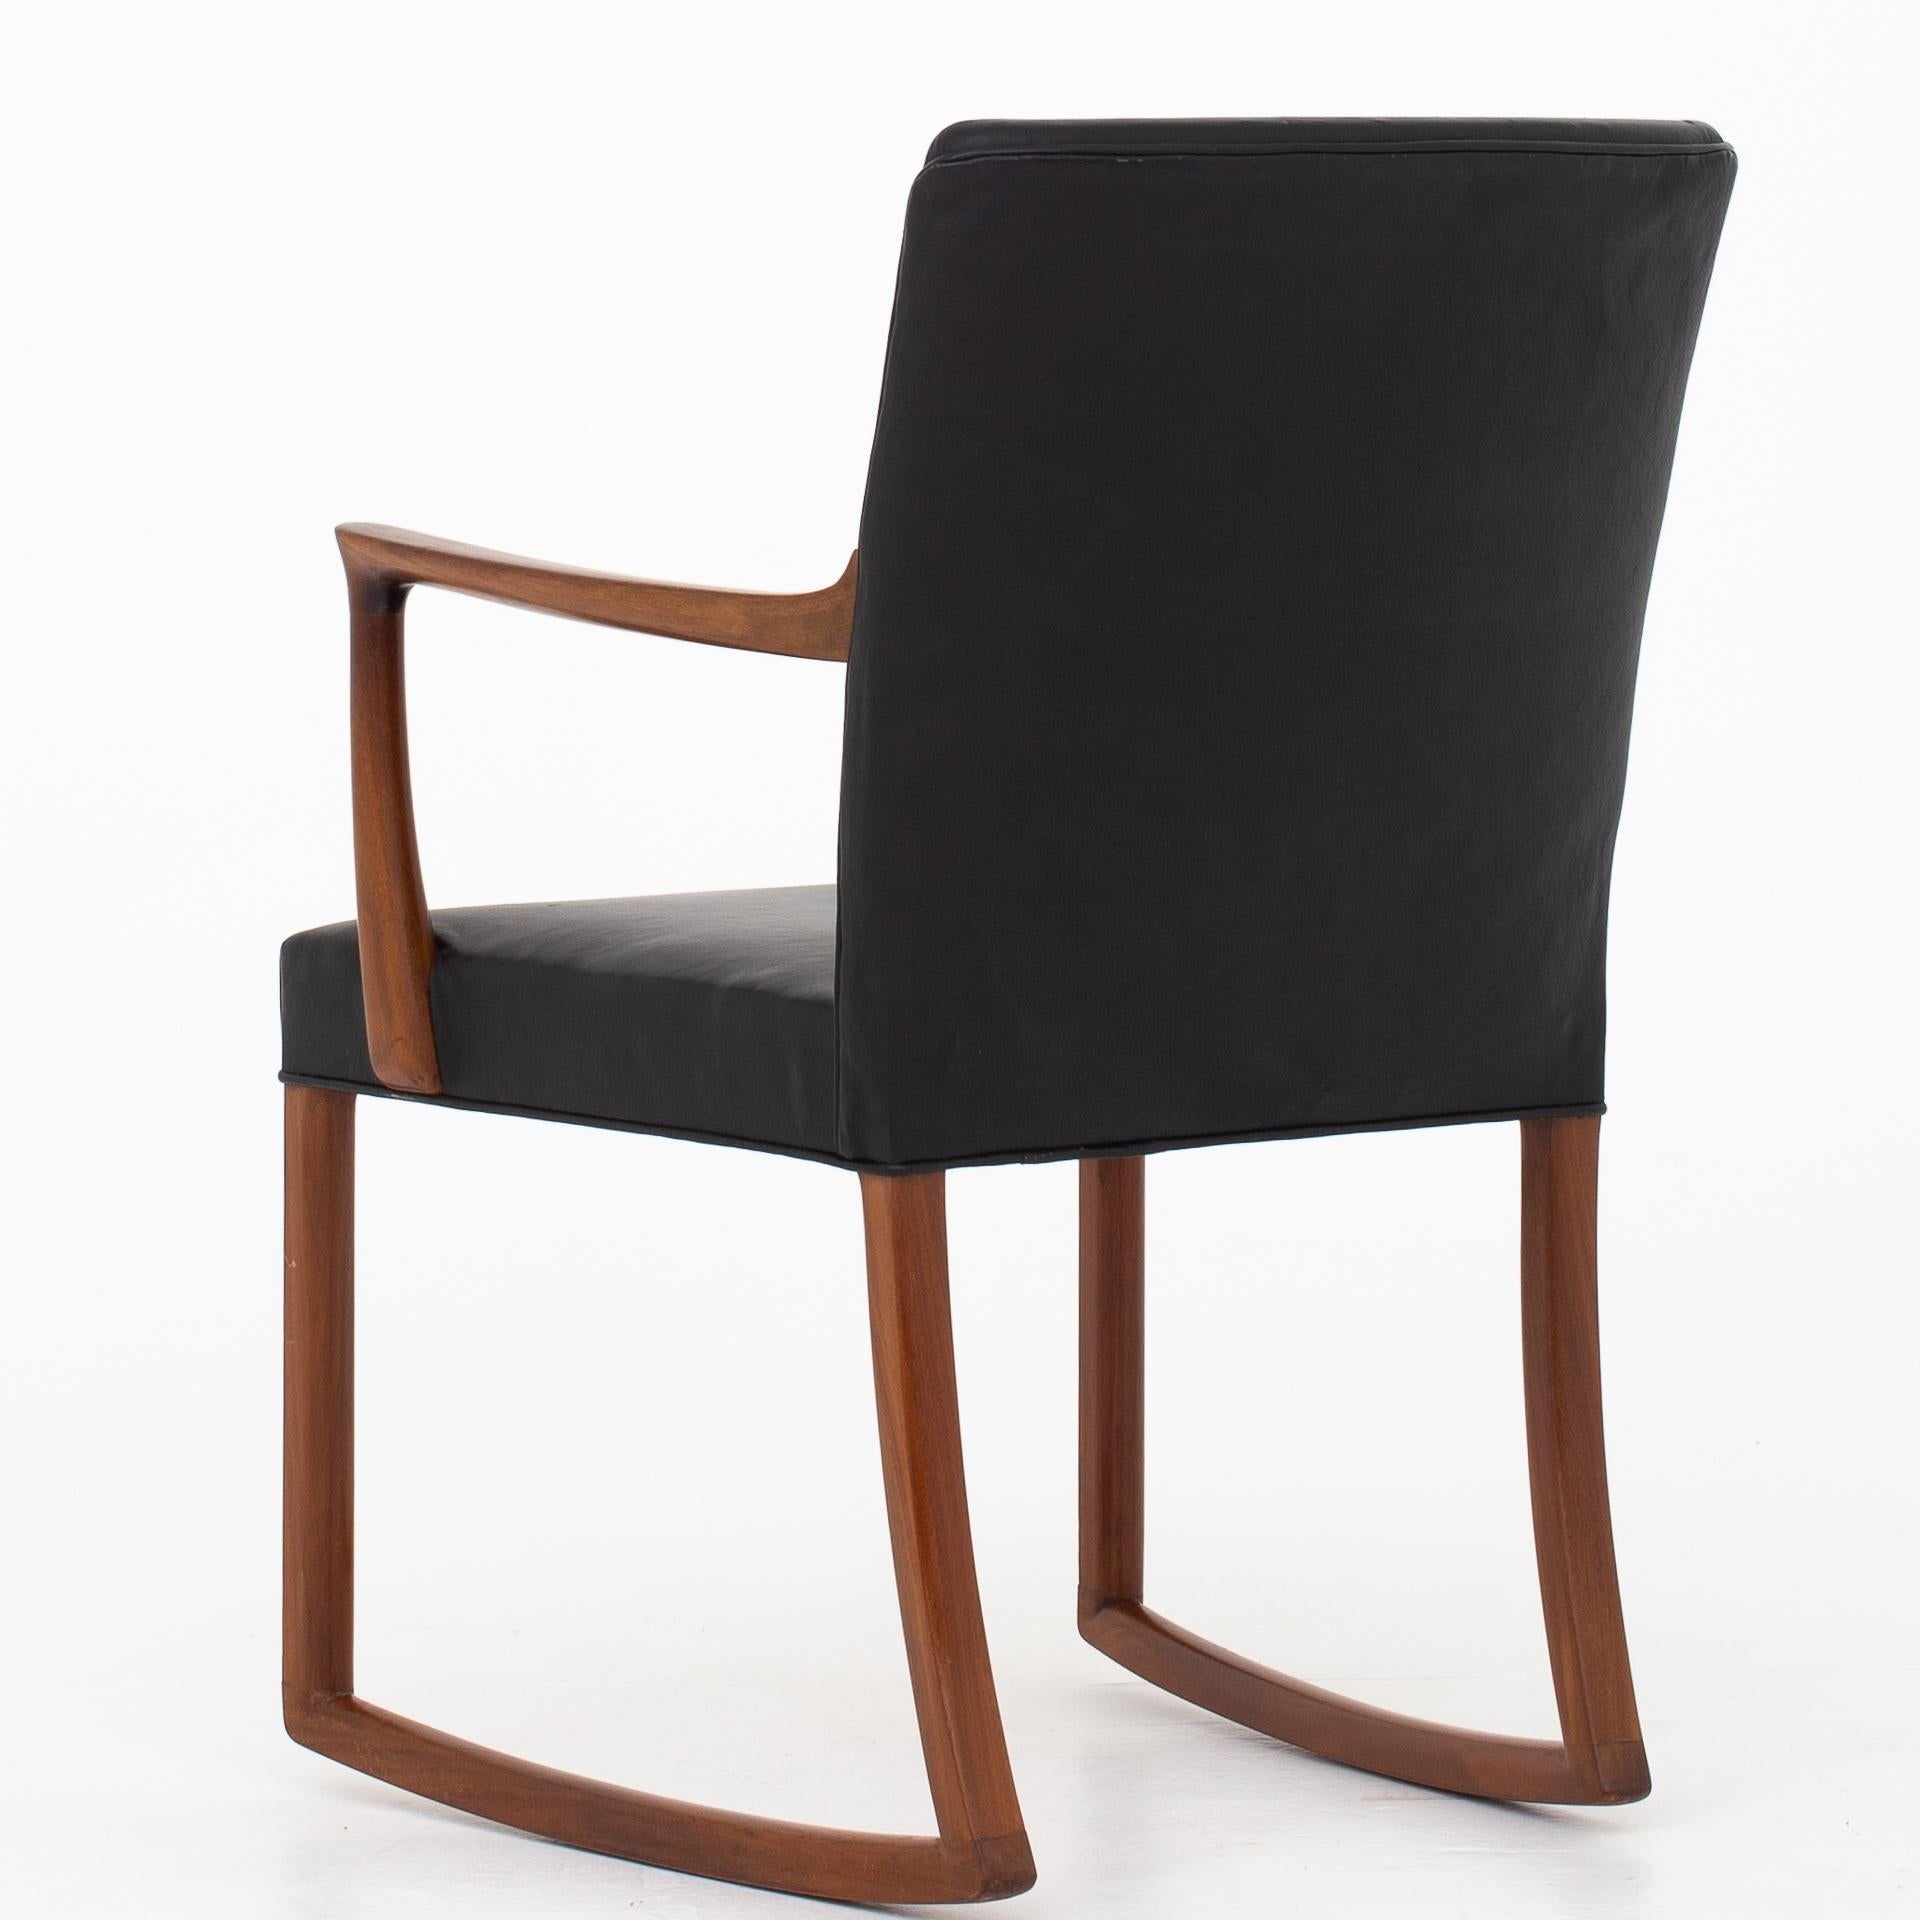 Rocking chair in mahogany and patinated black leather. Maker A. J. Iversen.